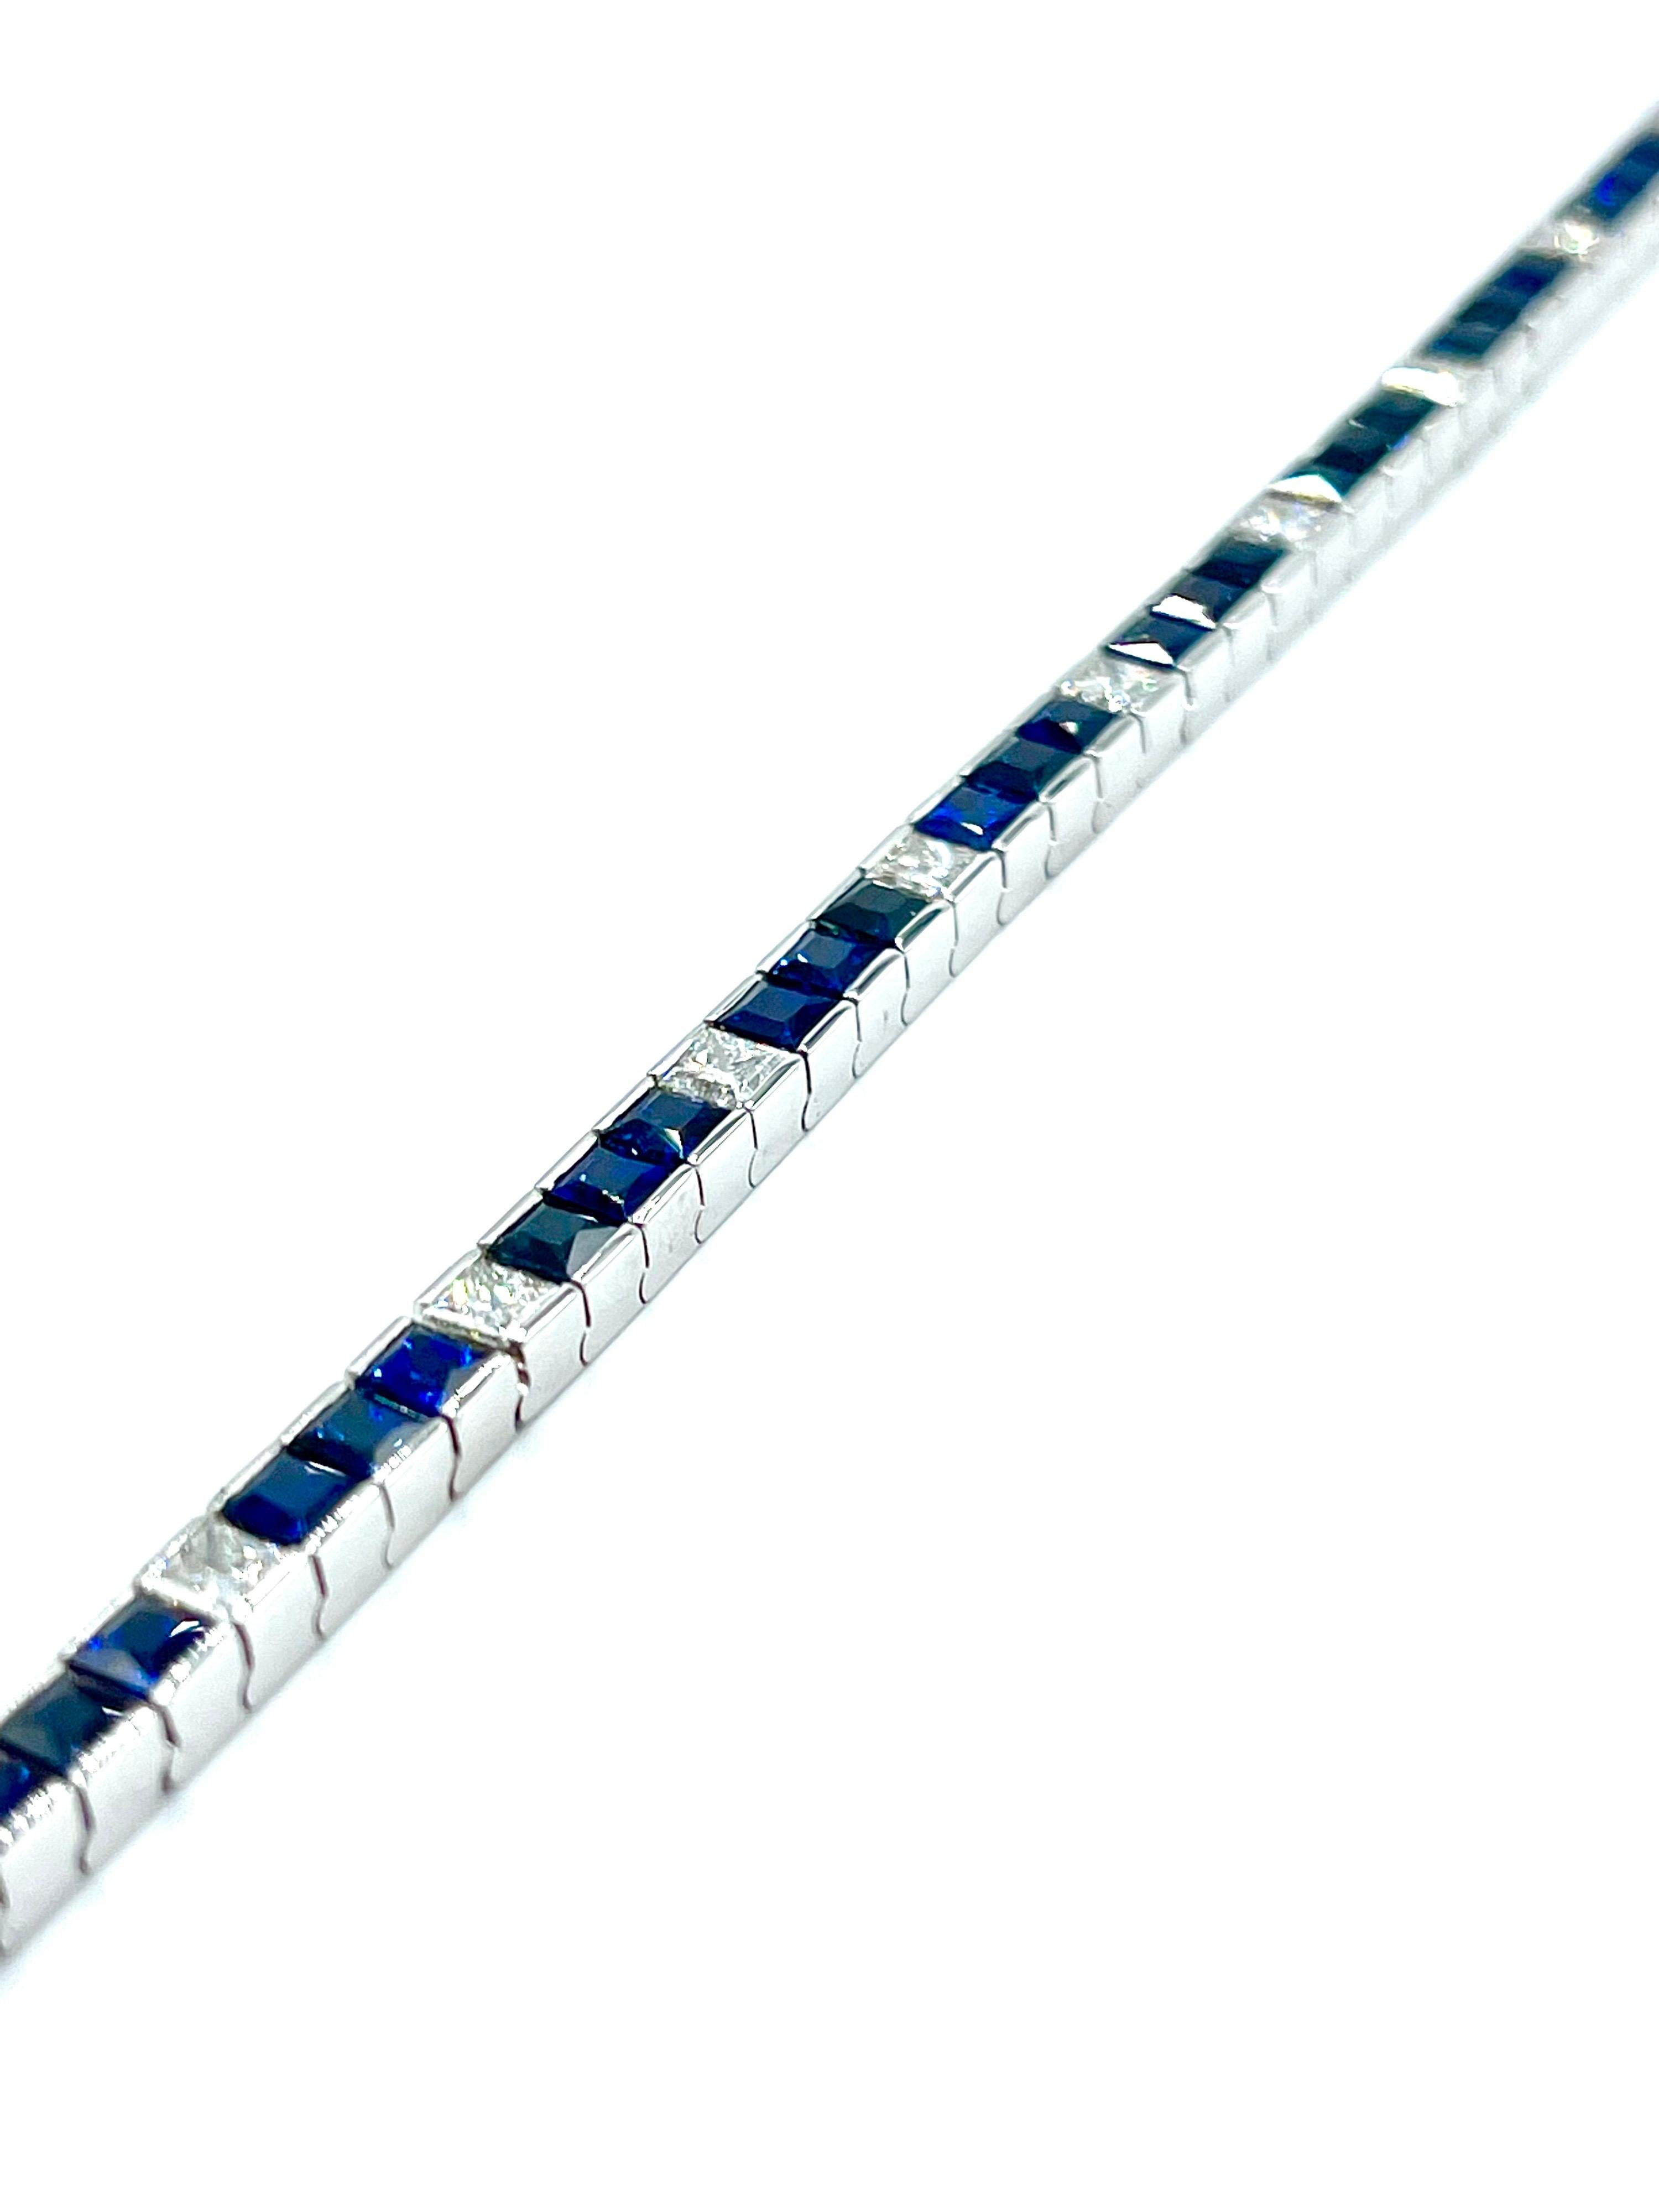 This is a beautiful Sapphire and Diamond line bracelet!  The stones in the alternating Sapphire and Diamond pattern are channel set in individual links in a straight line across the bracelet.  The 48 French cut Sapphires have a total weight of 8.15